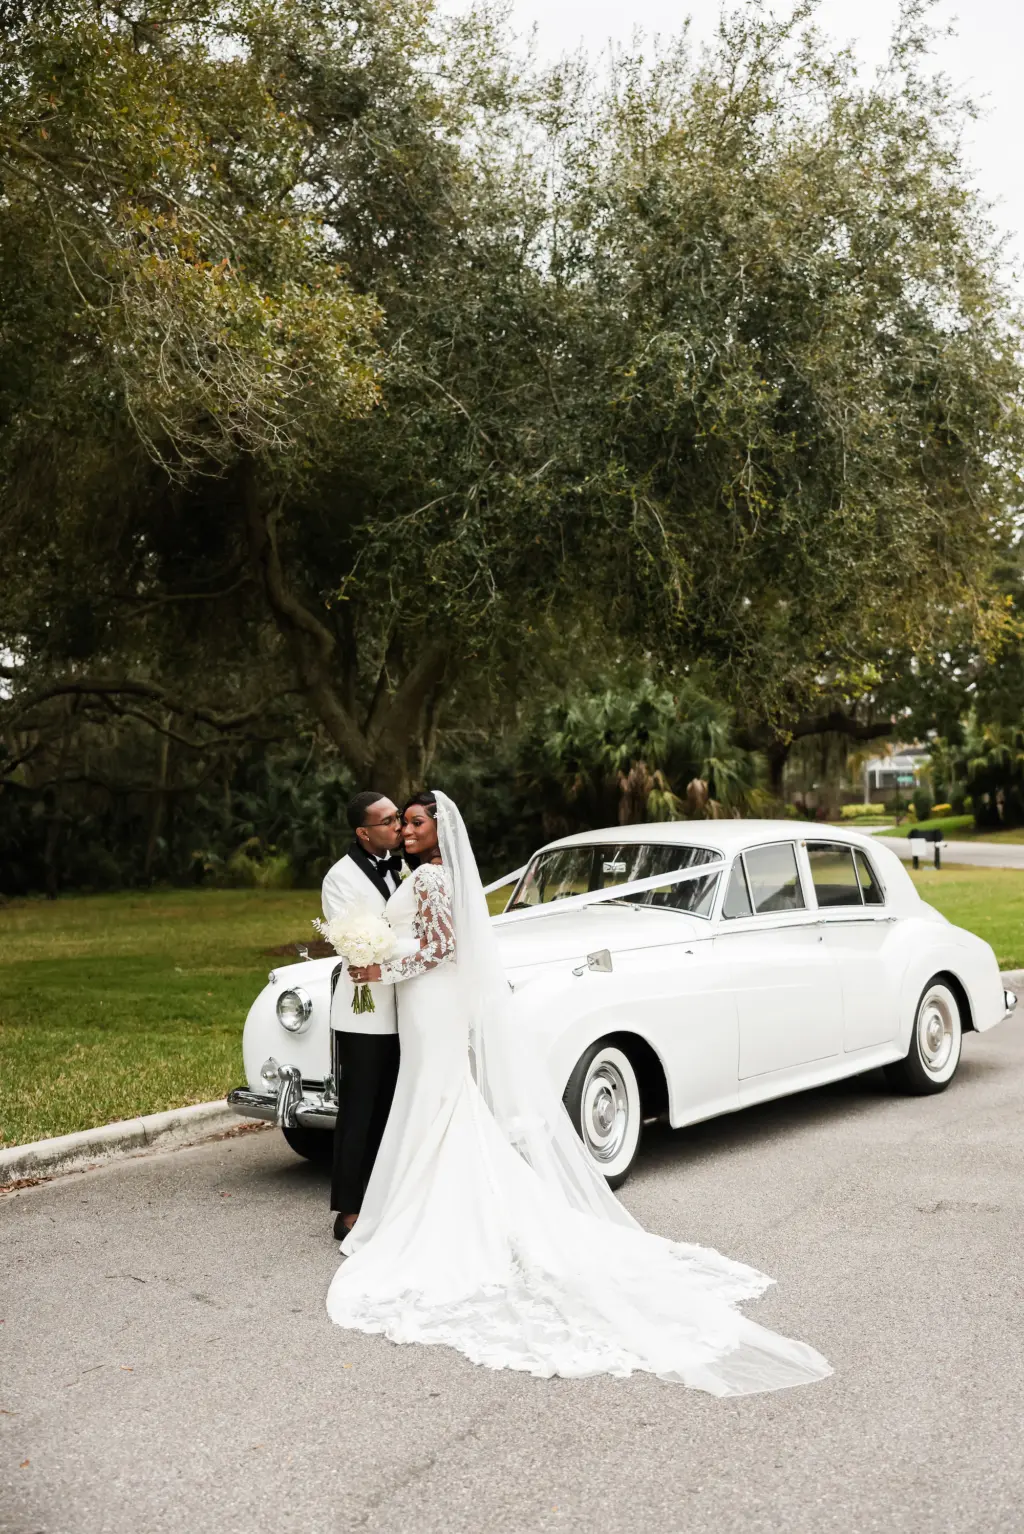 Bride and Groom in Front of White Classic Vintage Car Wedding Portrait | Tampa Bay Photographer Lifelong Photography Studio